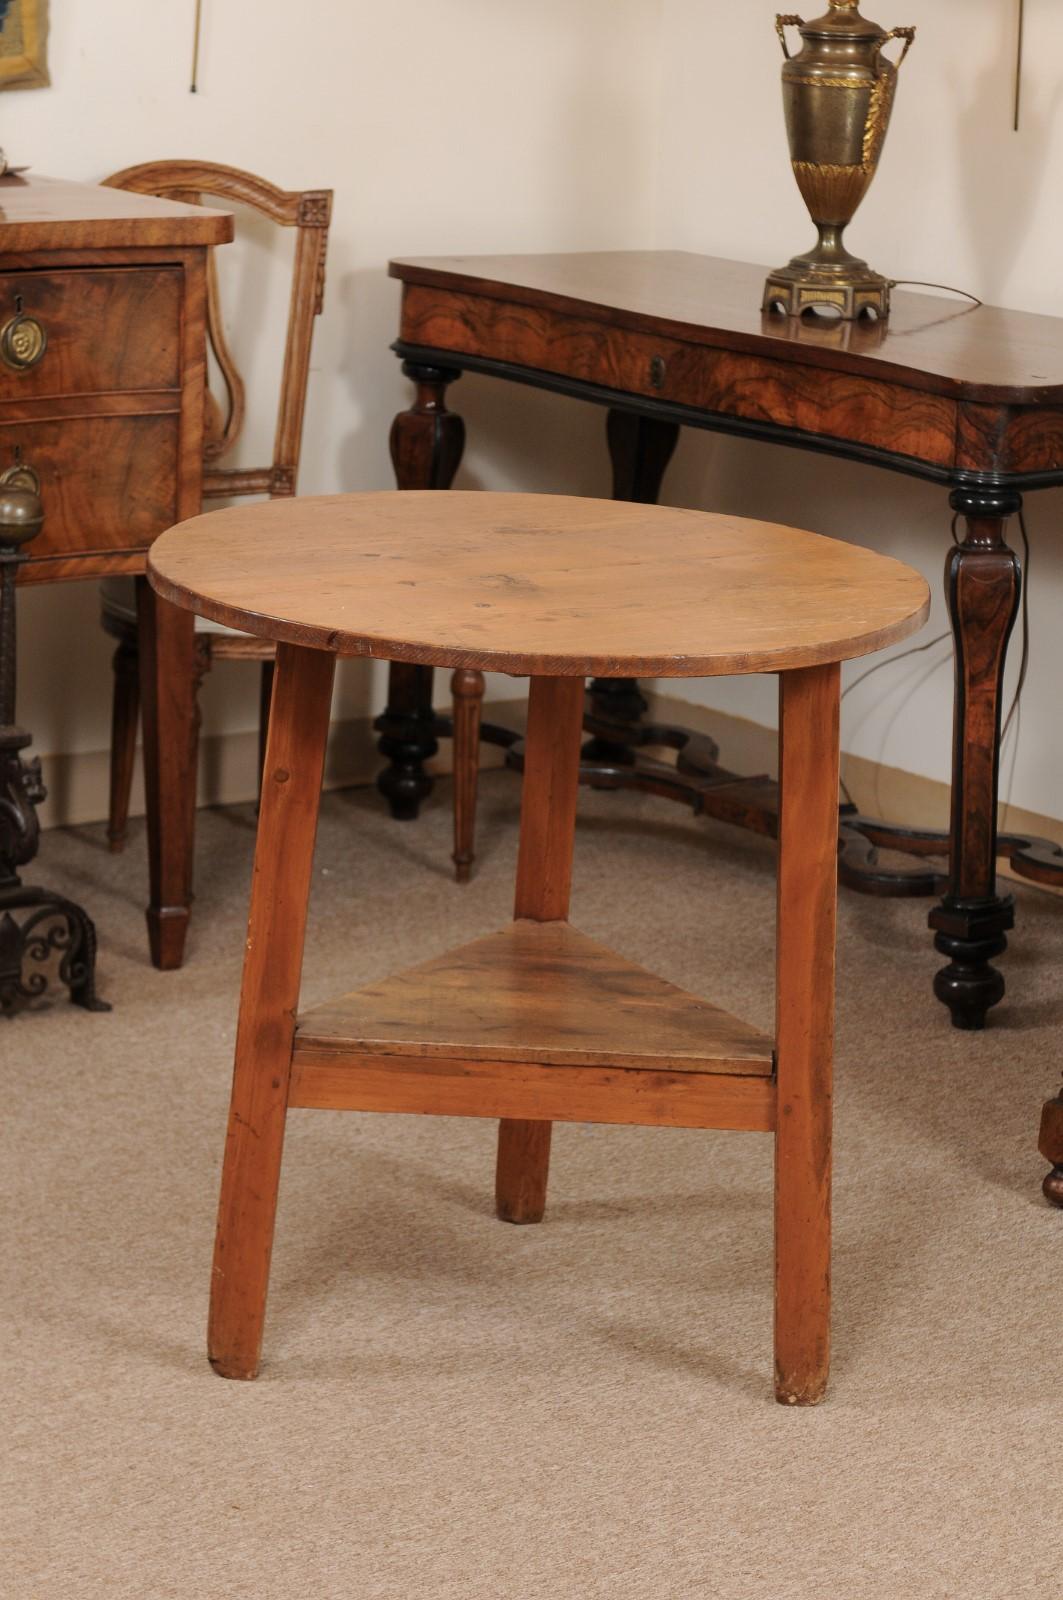 19th century English Pine cricket table with round top, lower triangular shelf joined by 3 legs.